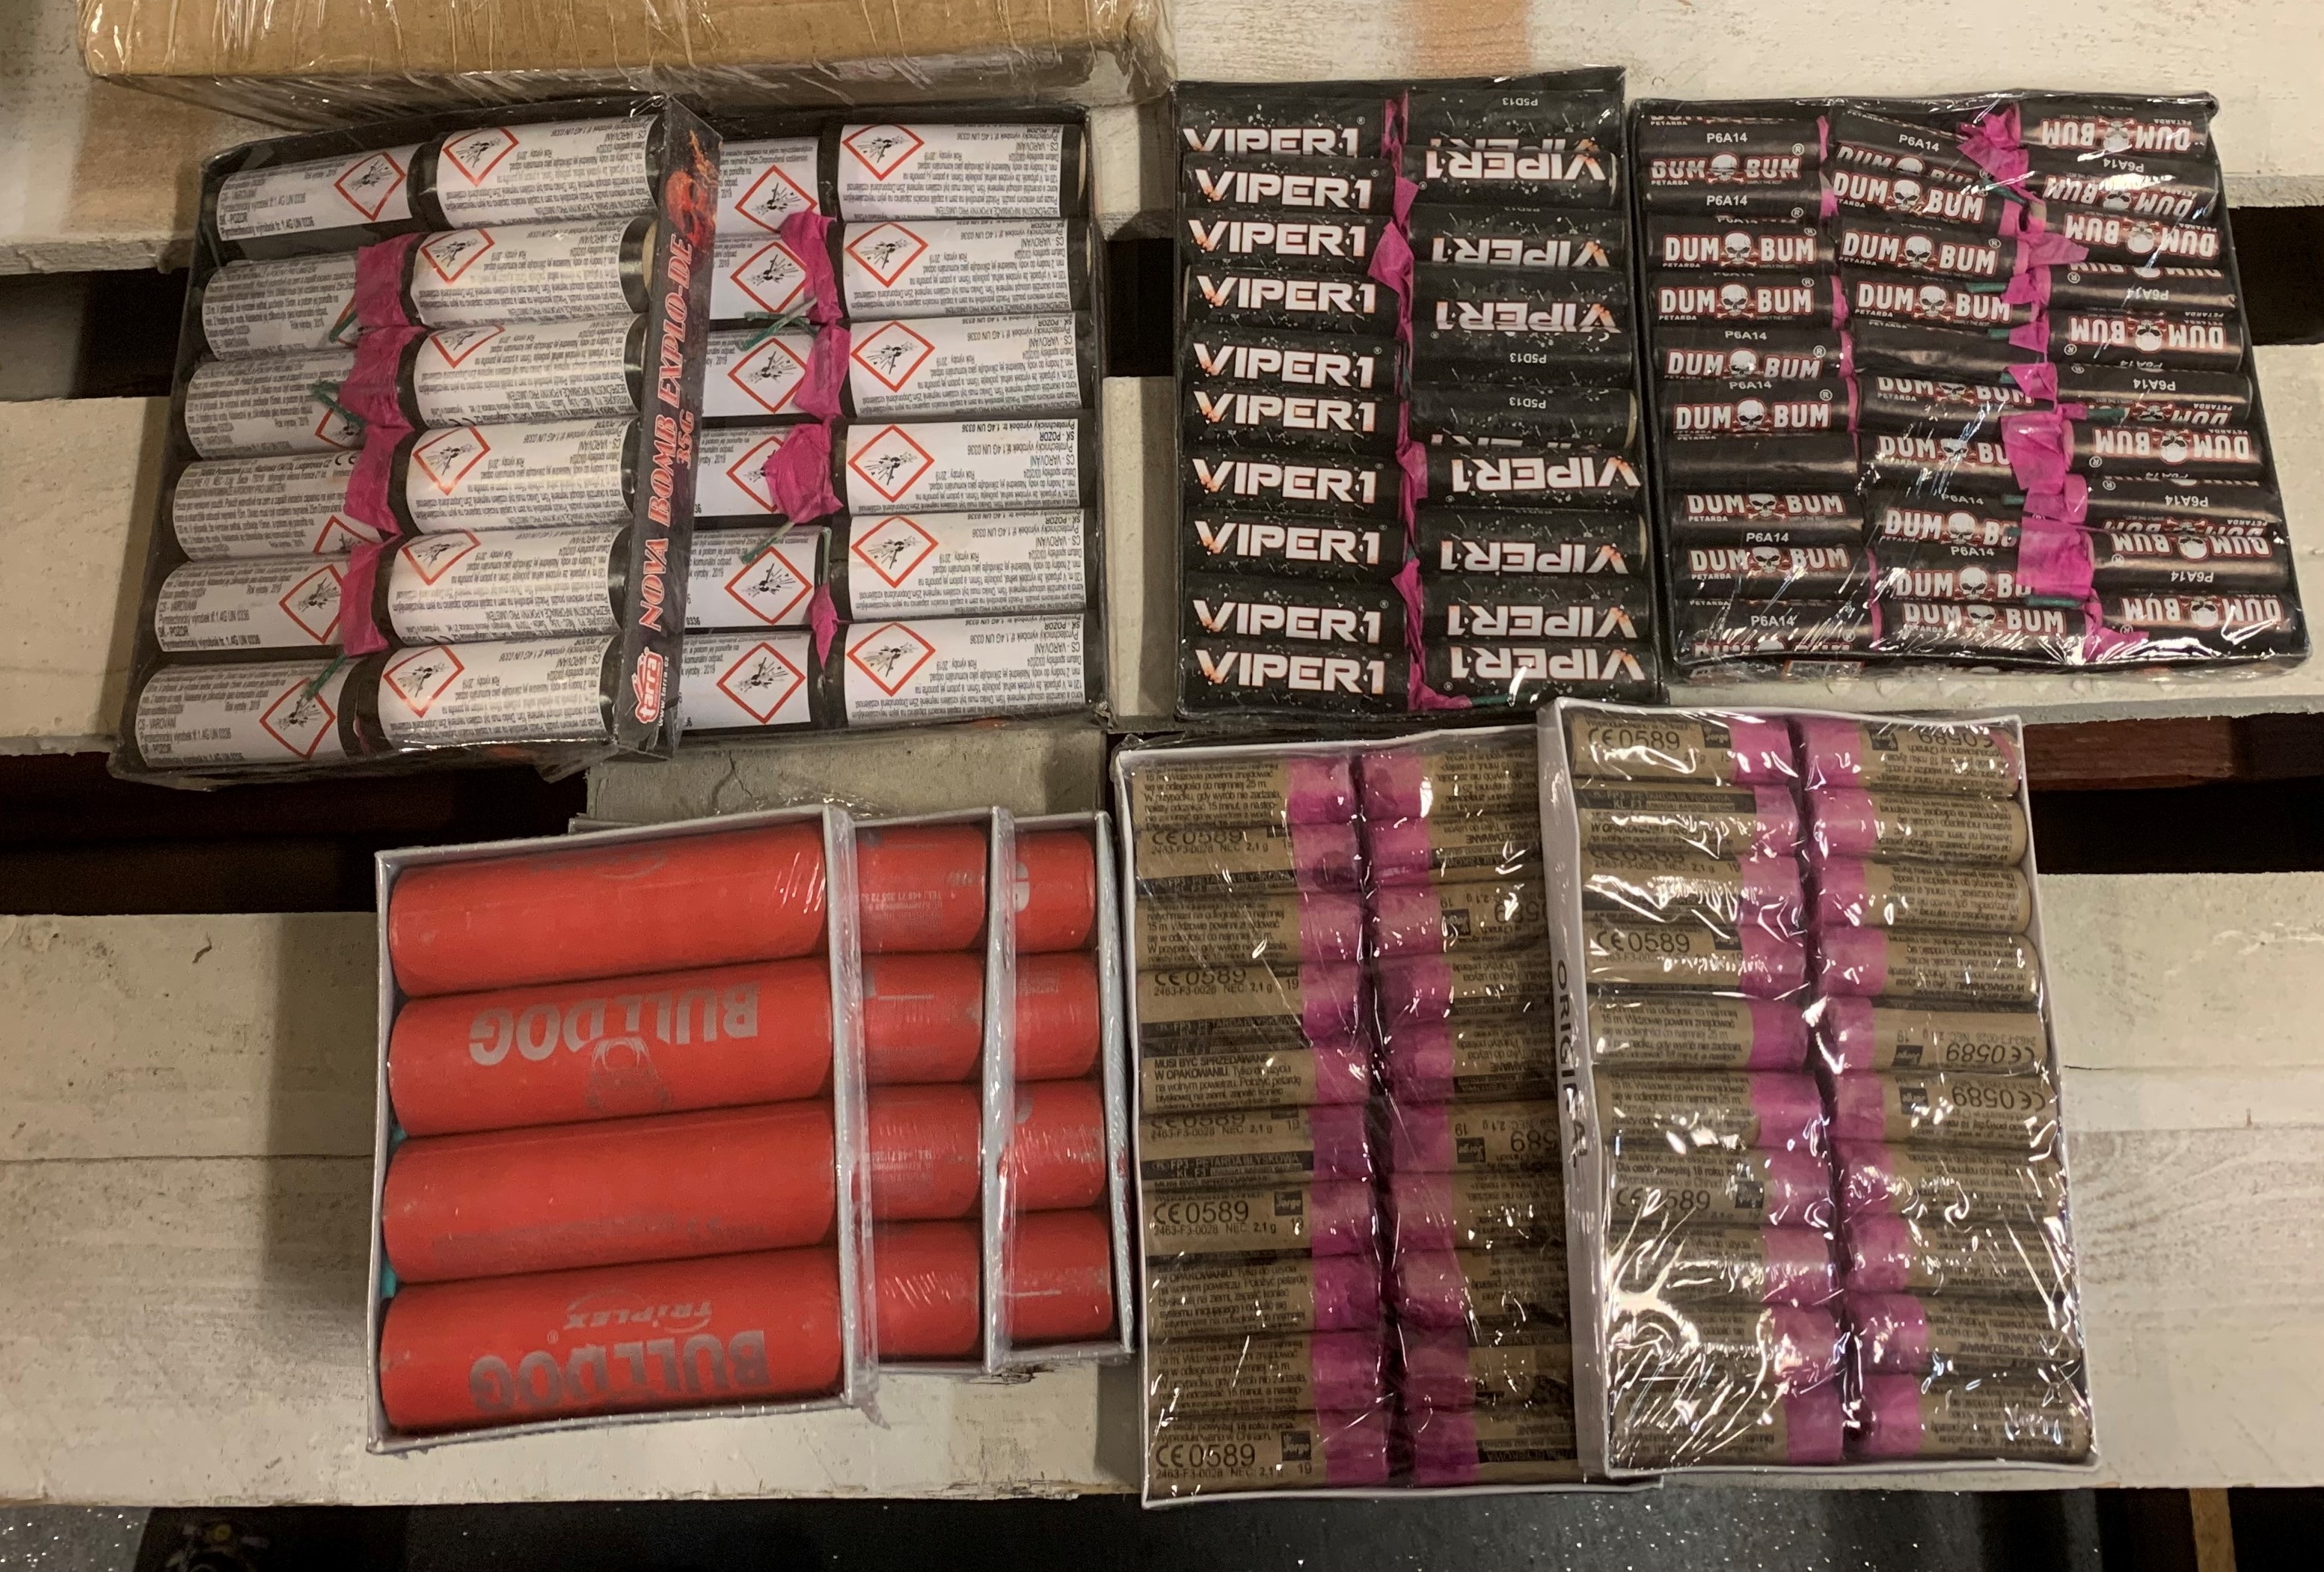 Record quantities of illegal fireworks confiscated